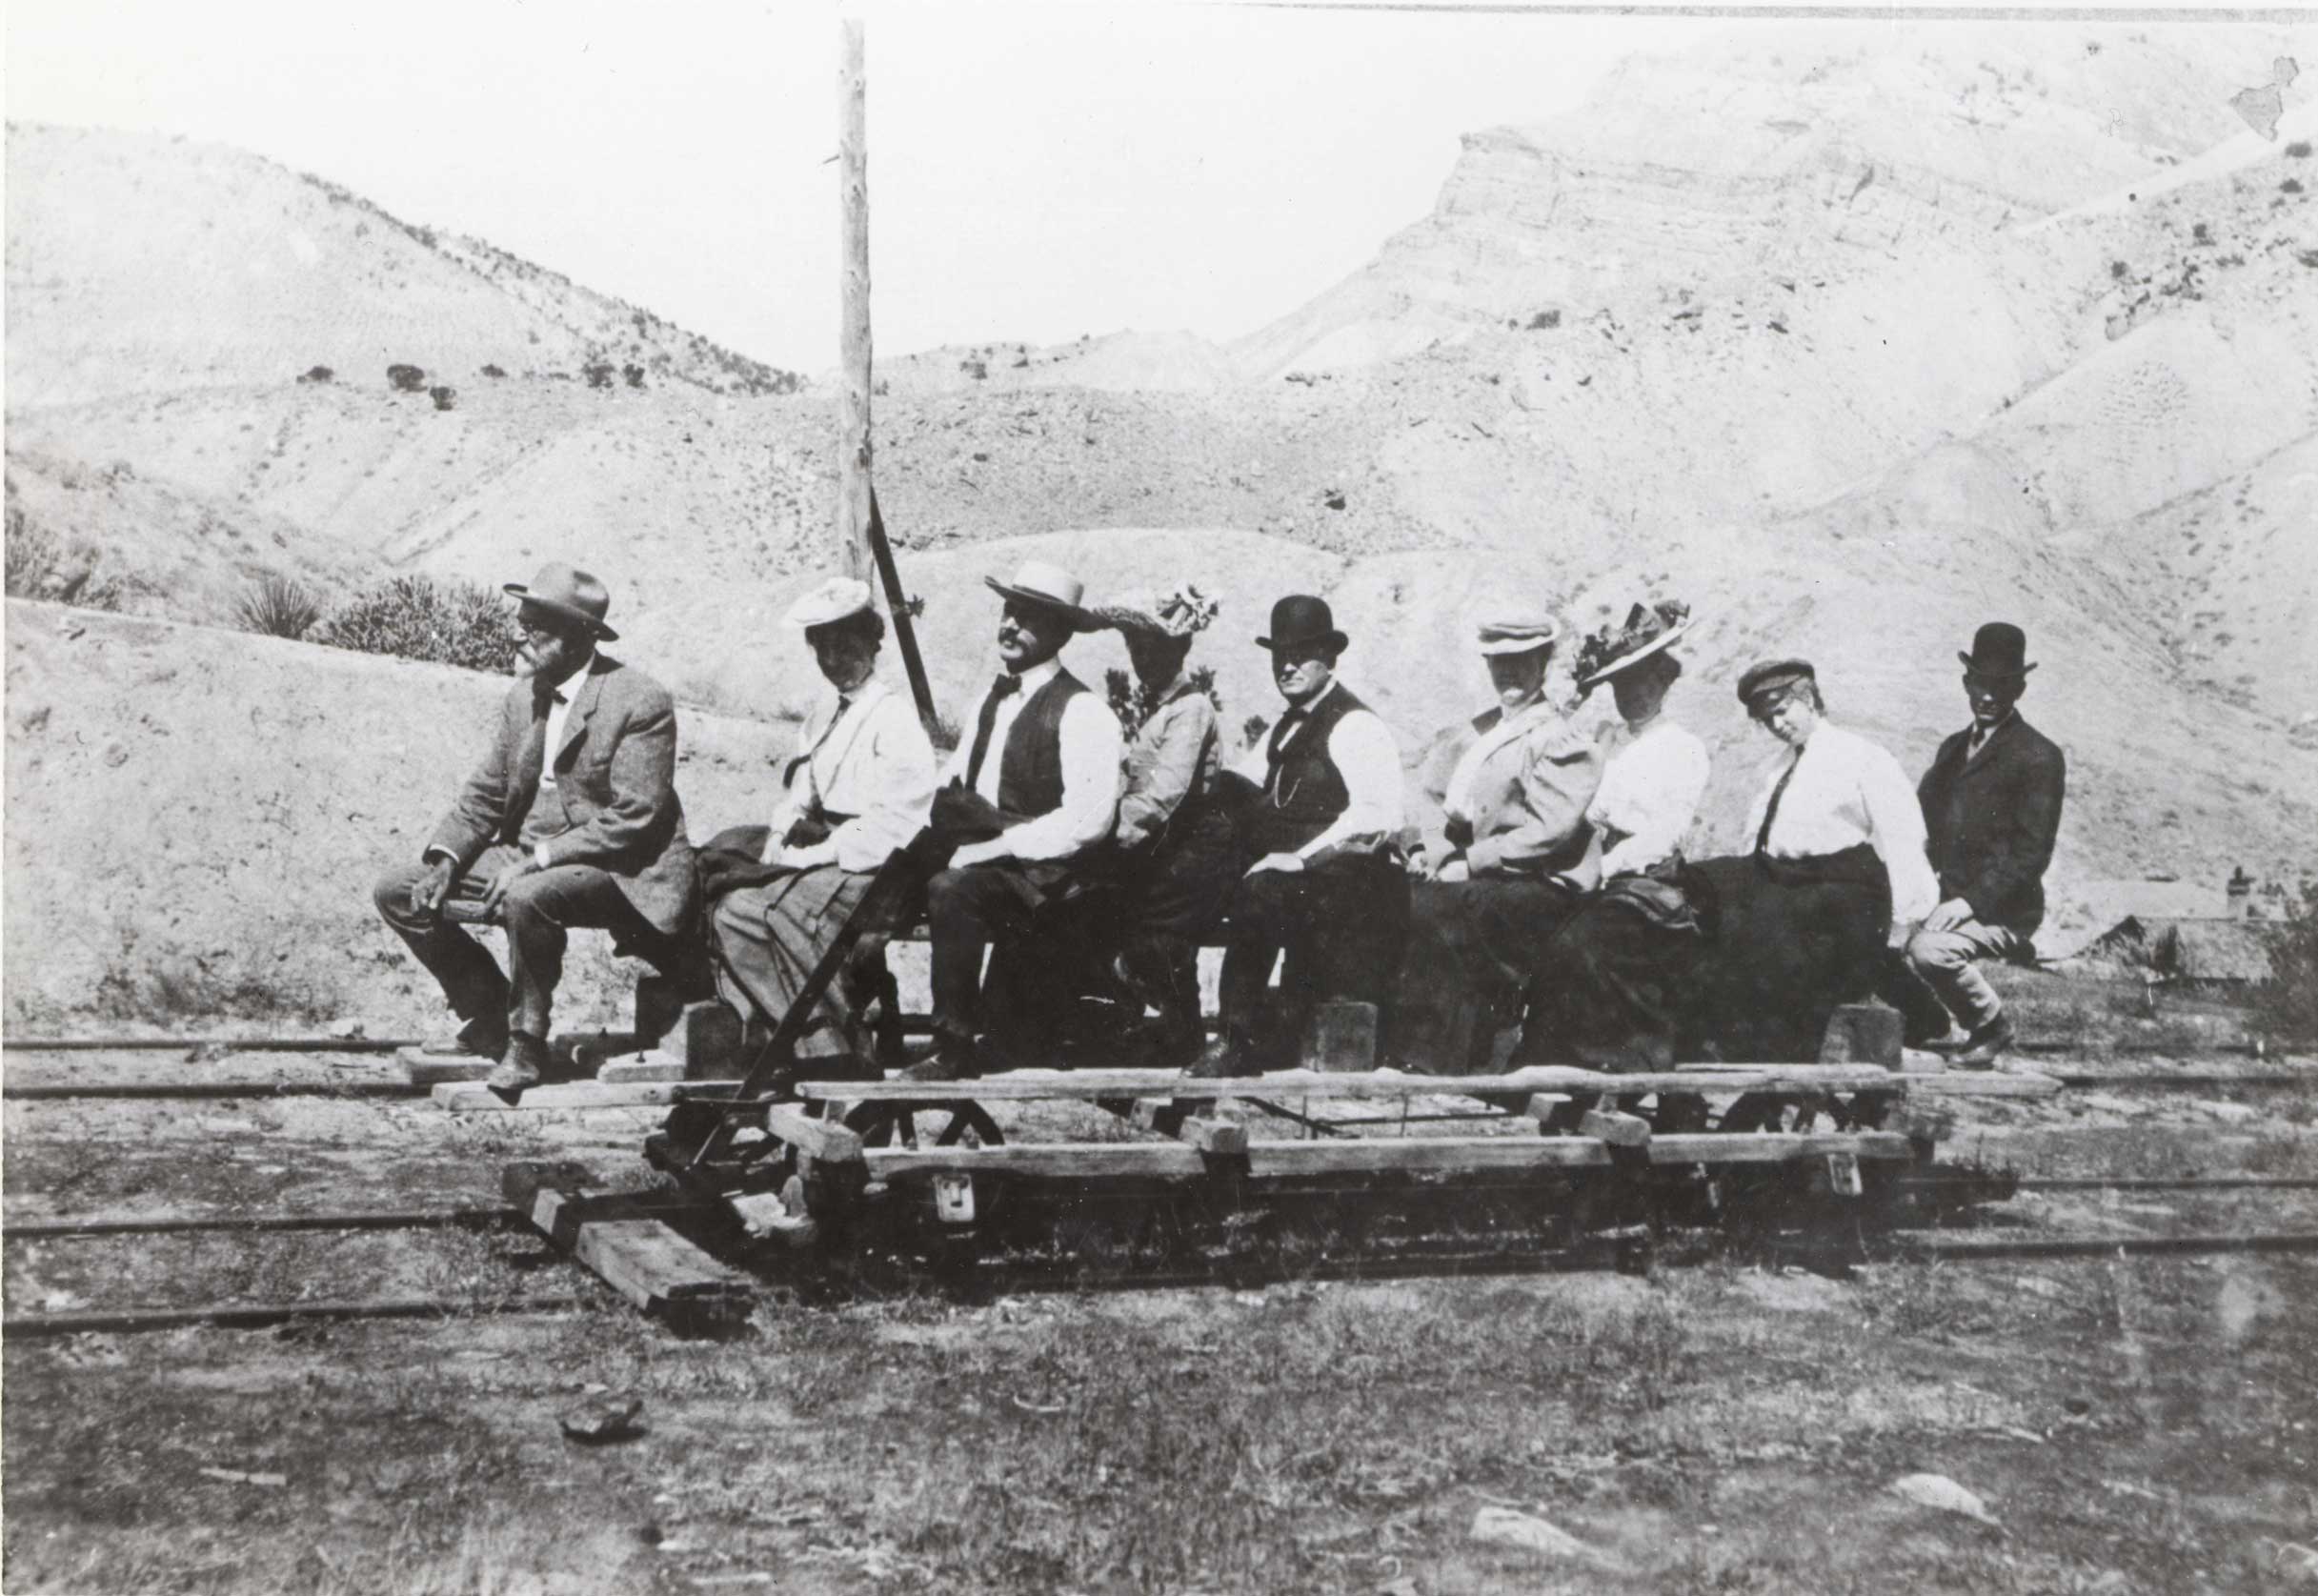 The Go Devil on the Little Book Cliff Railroad in 1903. Photo # 1982.0.20, Museums of Western Colorado.